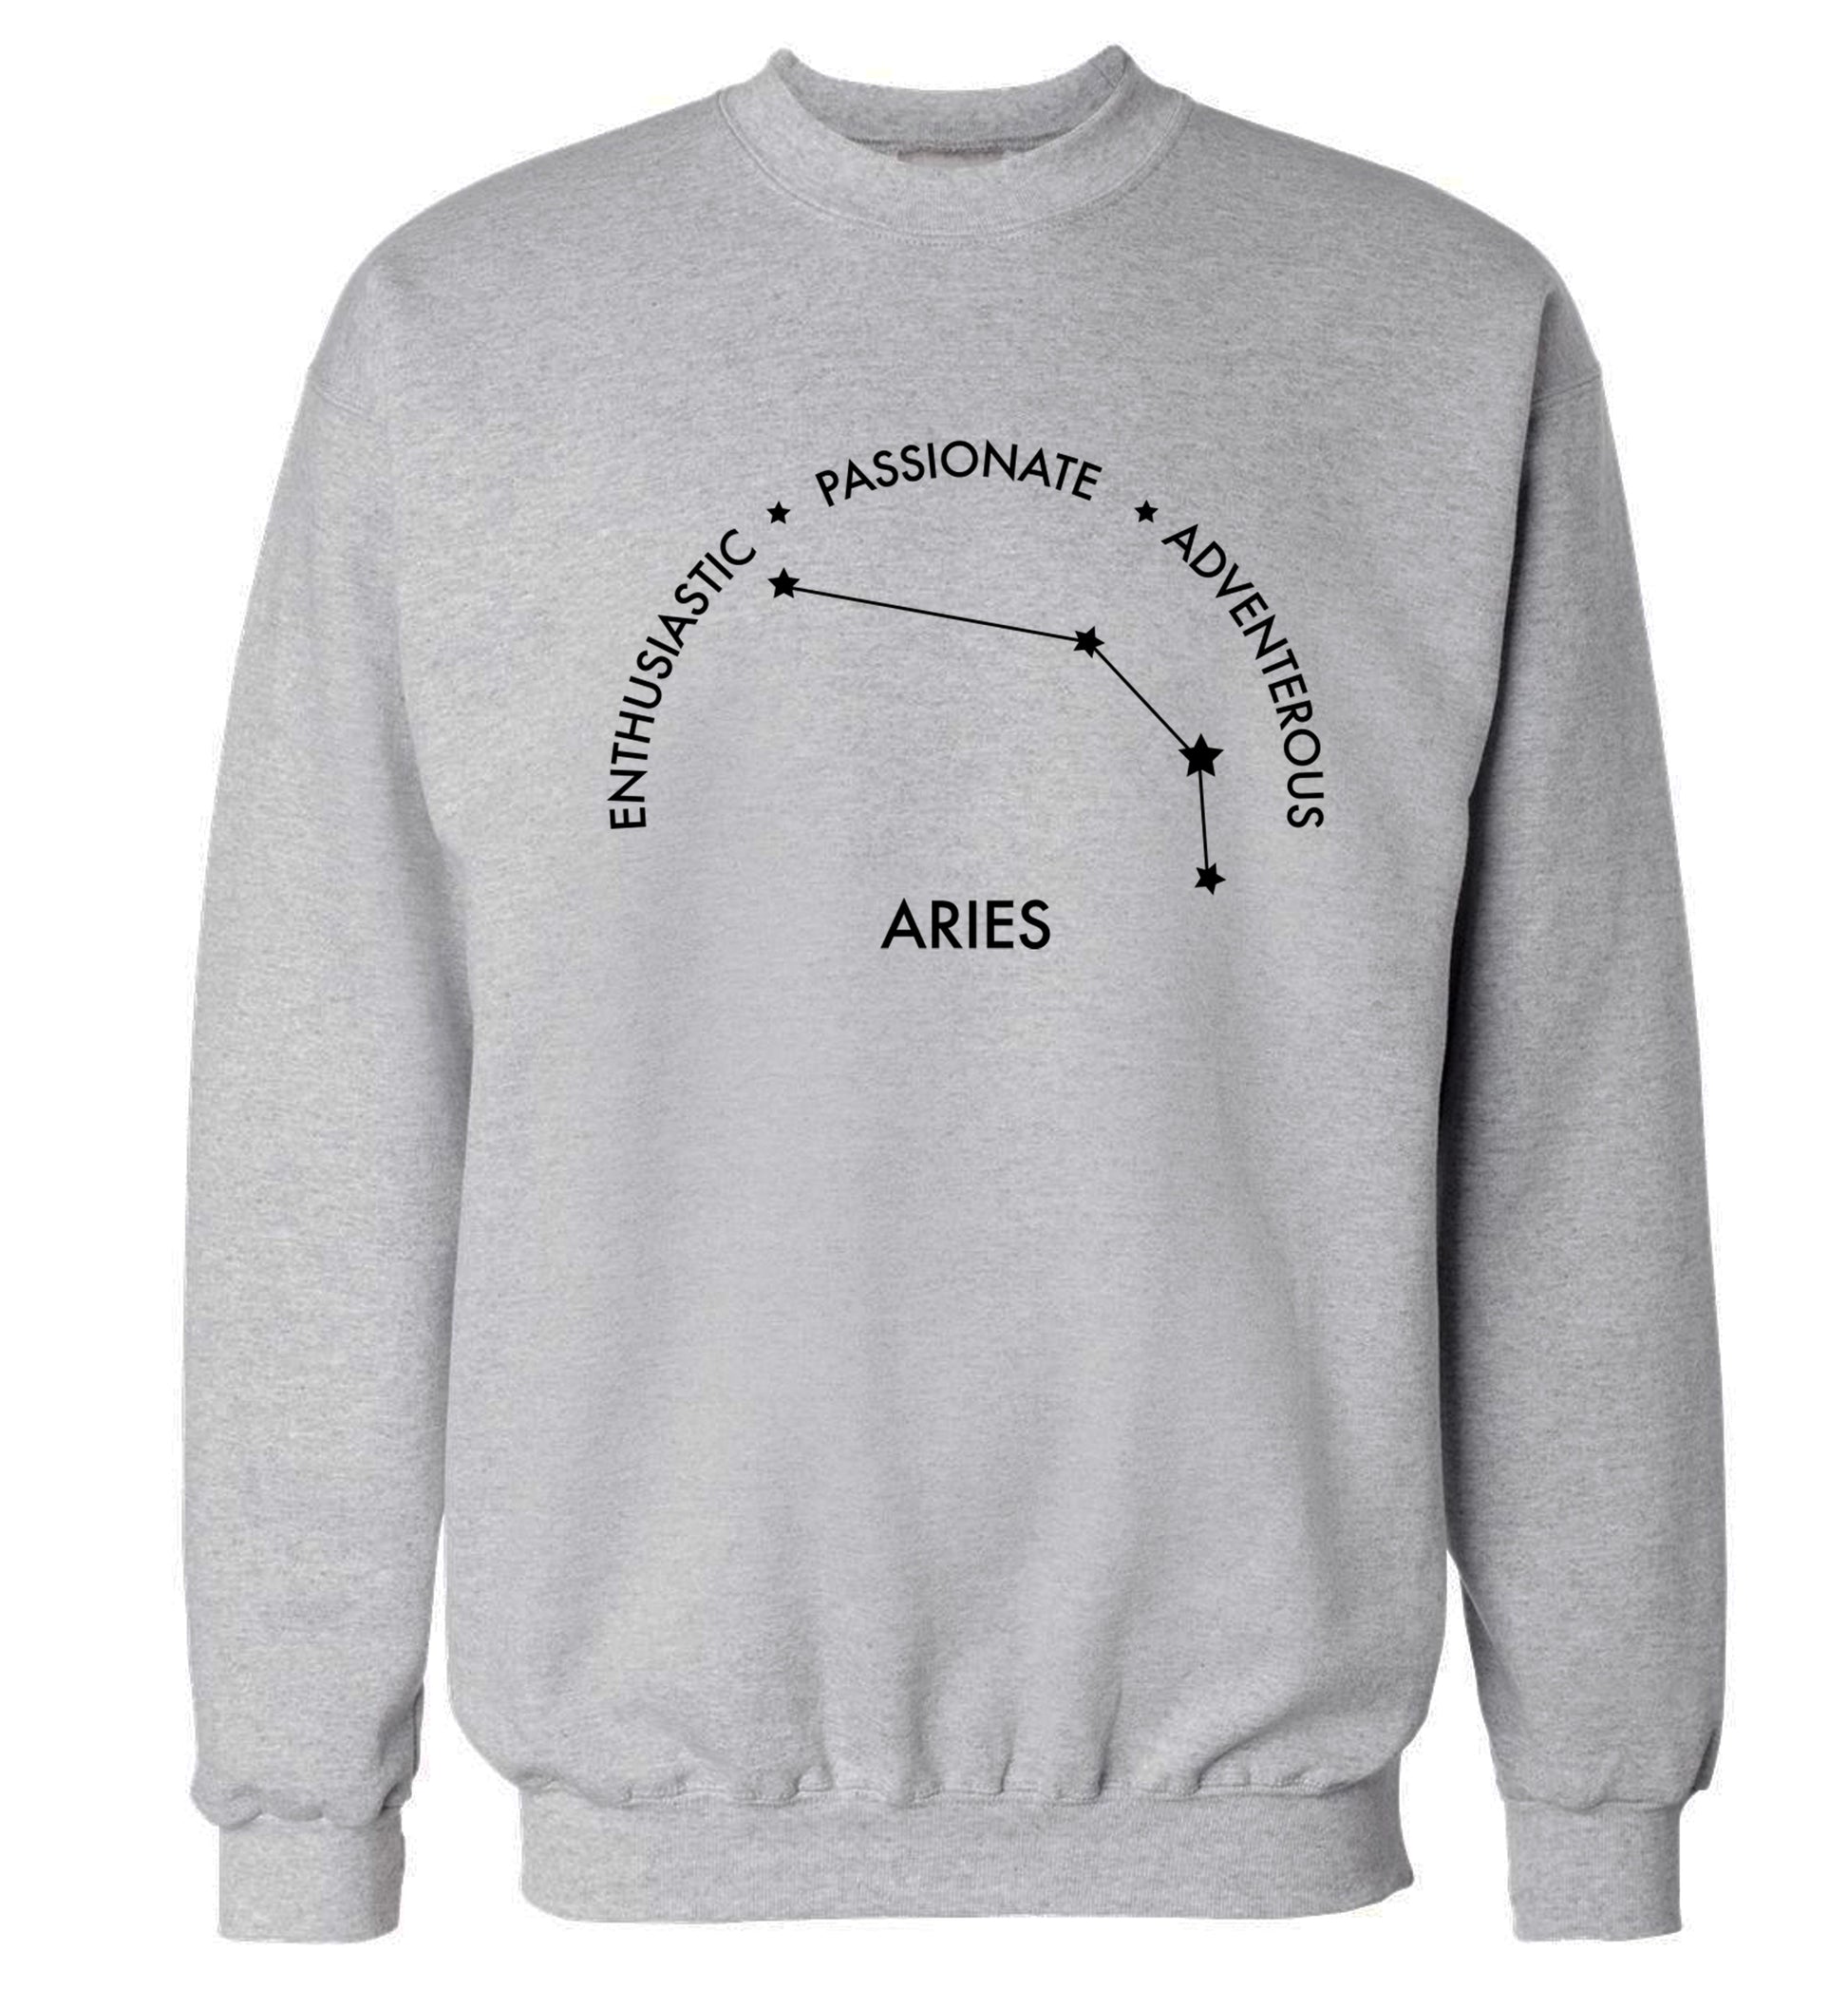 Aries enthusiastic | passionate | adventerous Adult's unisex grey Sweater 2XL